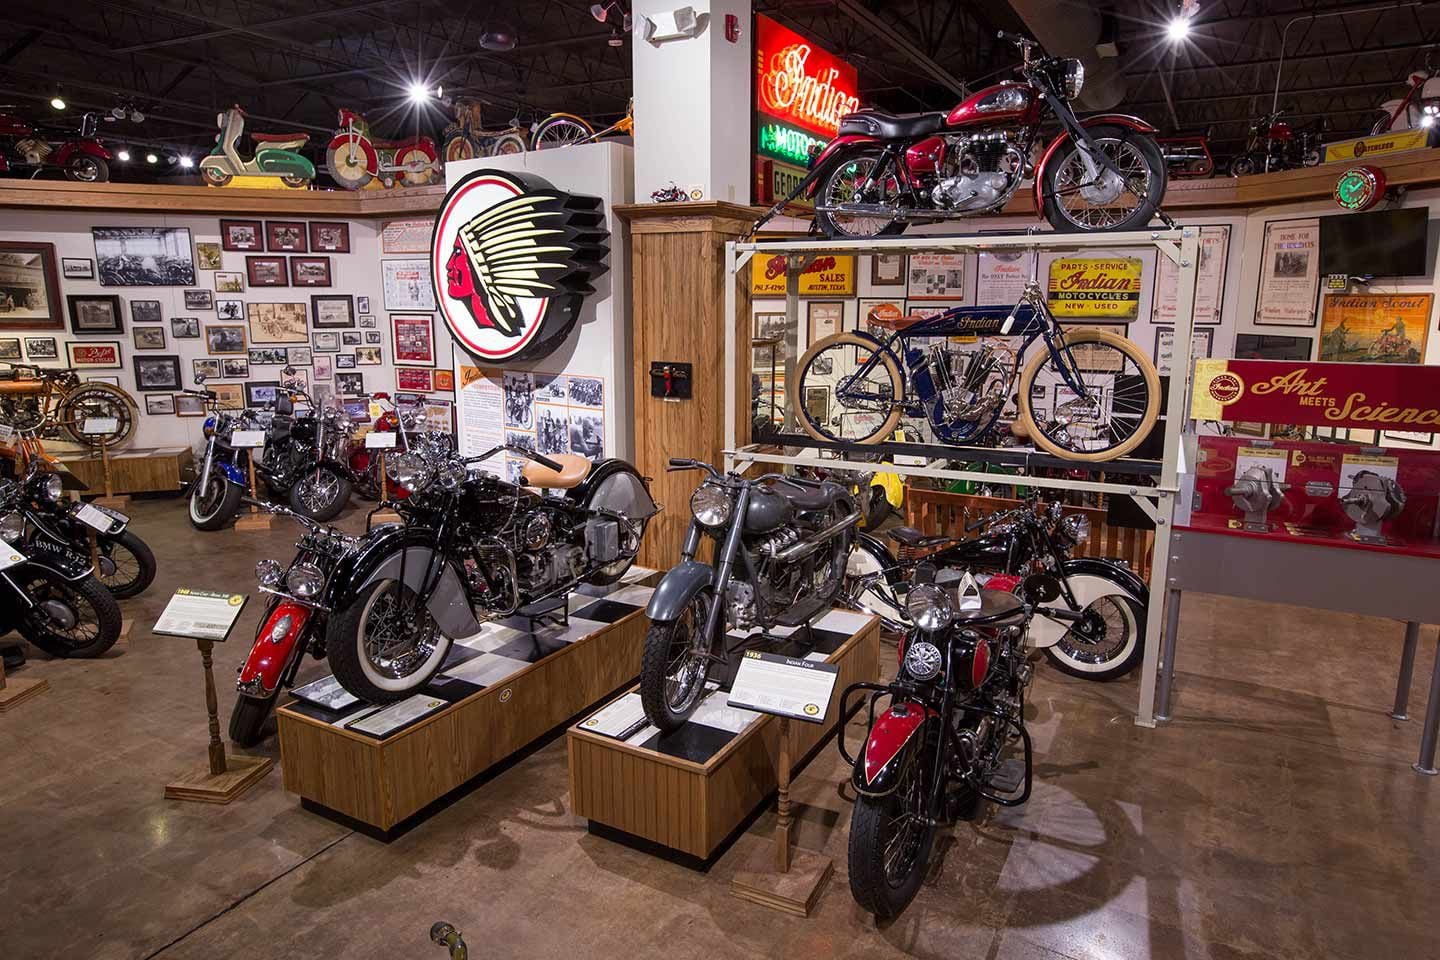 Between its vast collection of motorcycles, vintage signs, artwork, collectibles, and memorabilia, a trip to the National Motorcycle Museum was sensory overload.